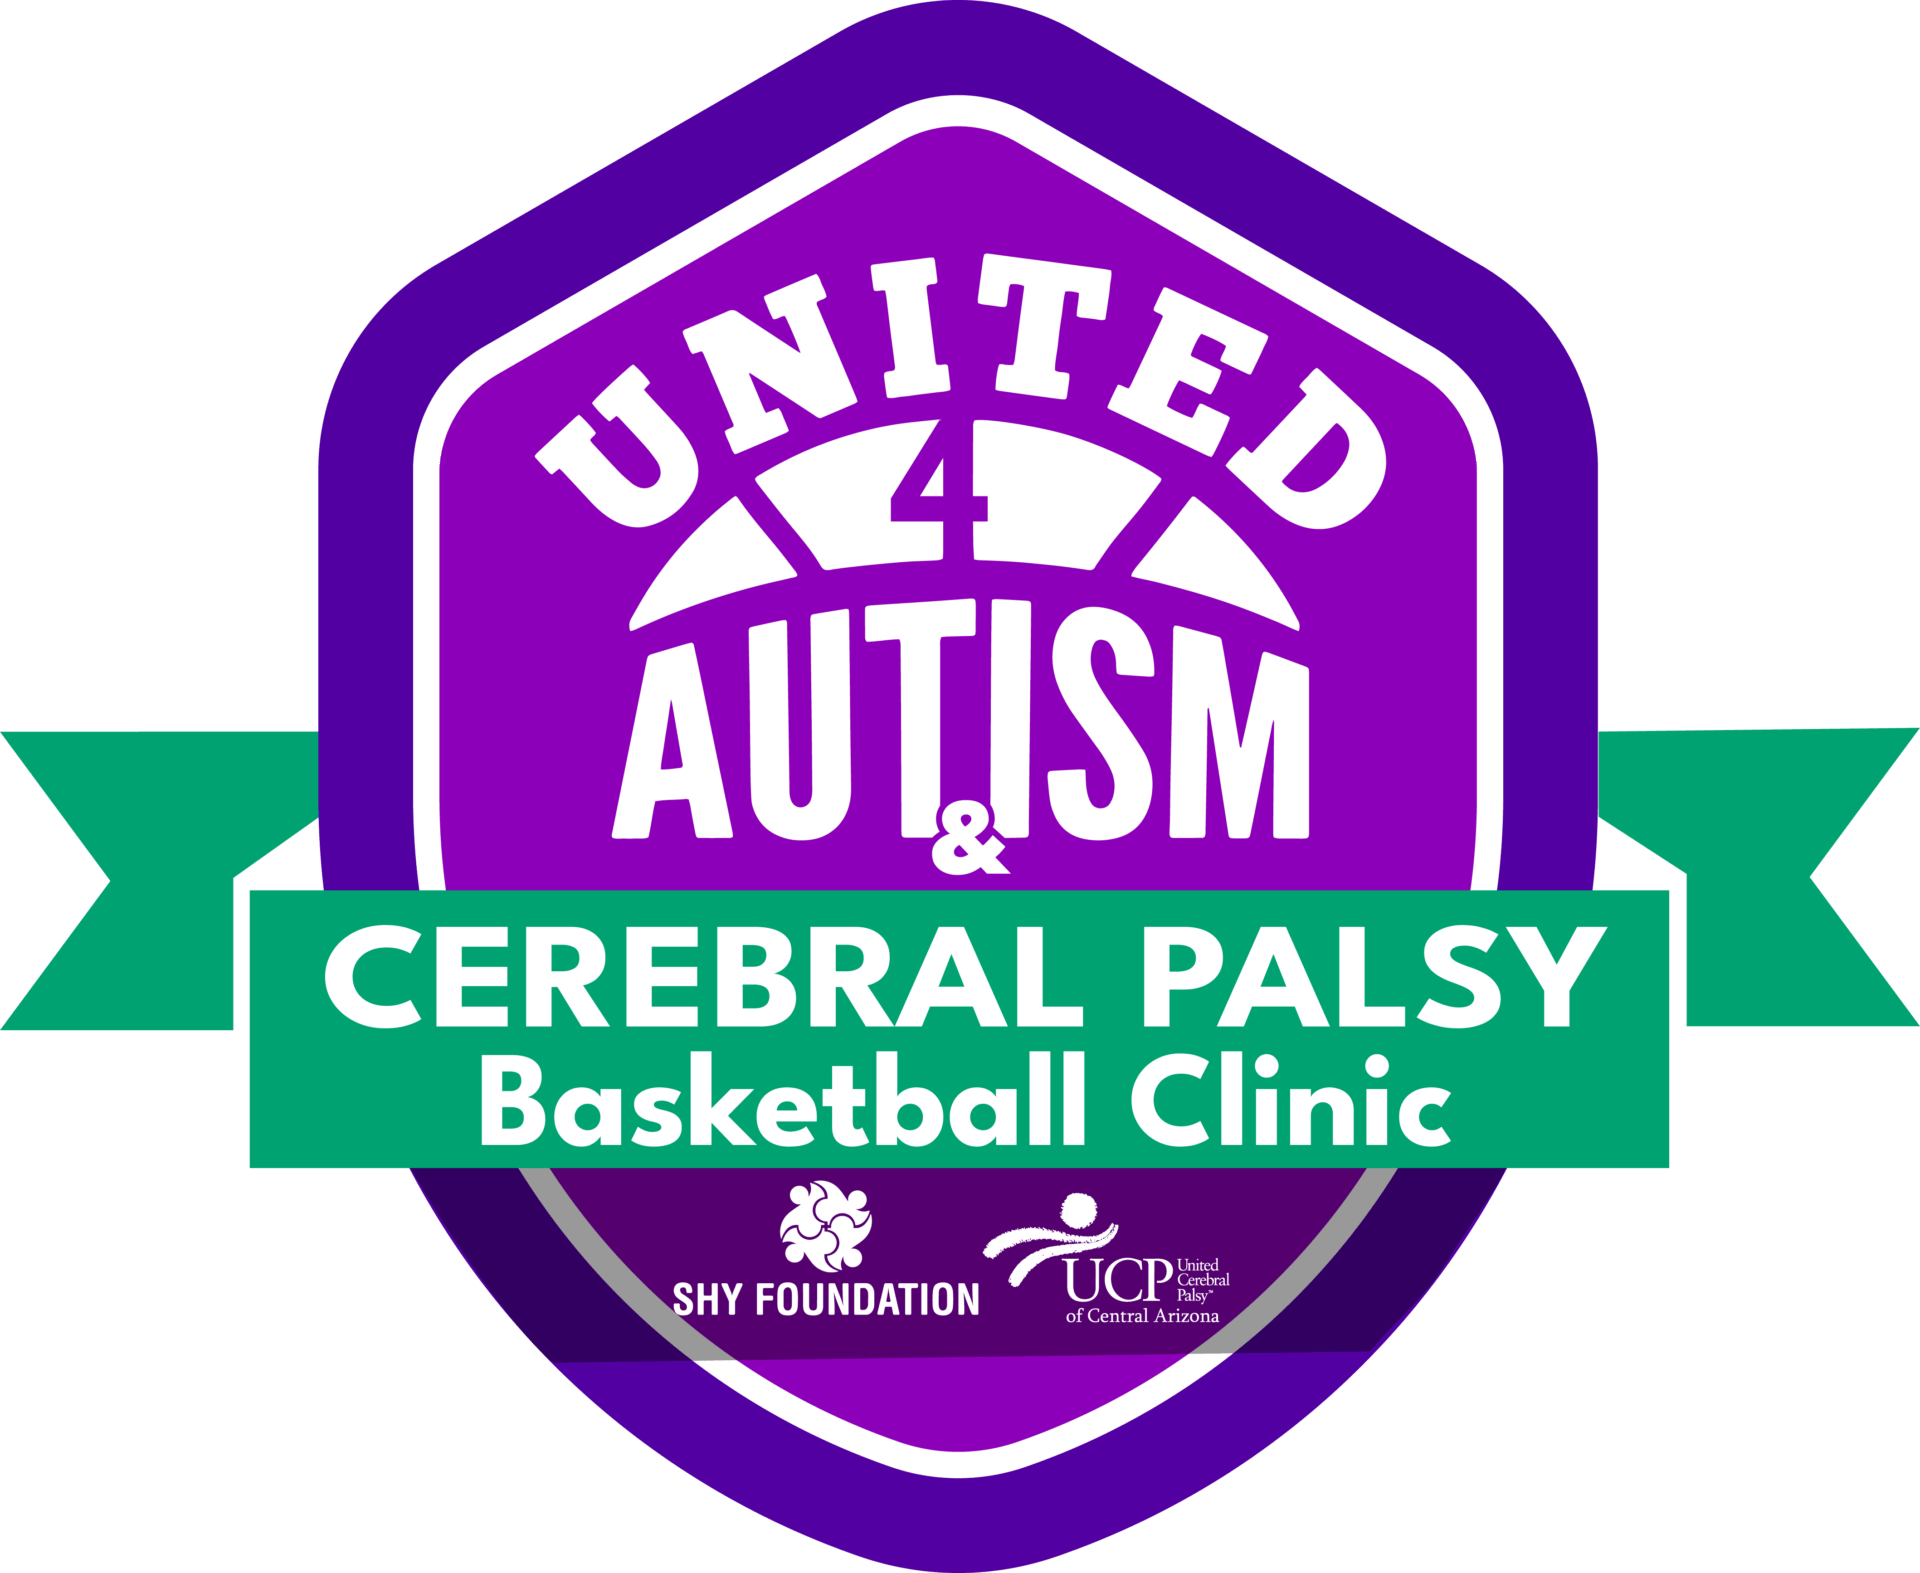 United autism and cerebral palsy basketball clinic logo for events.